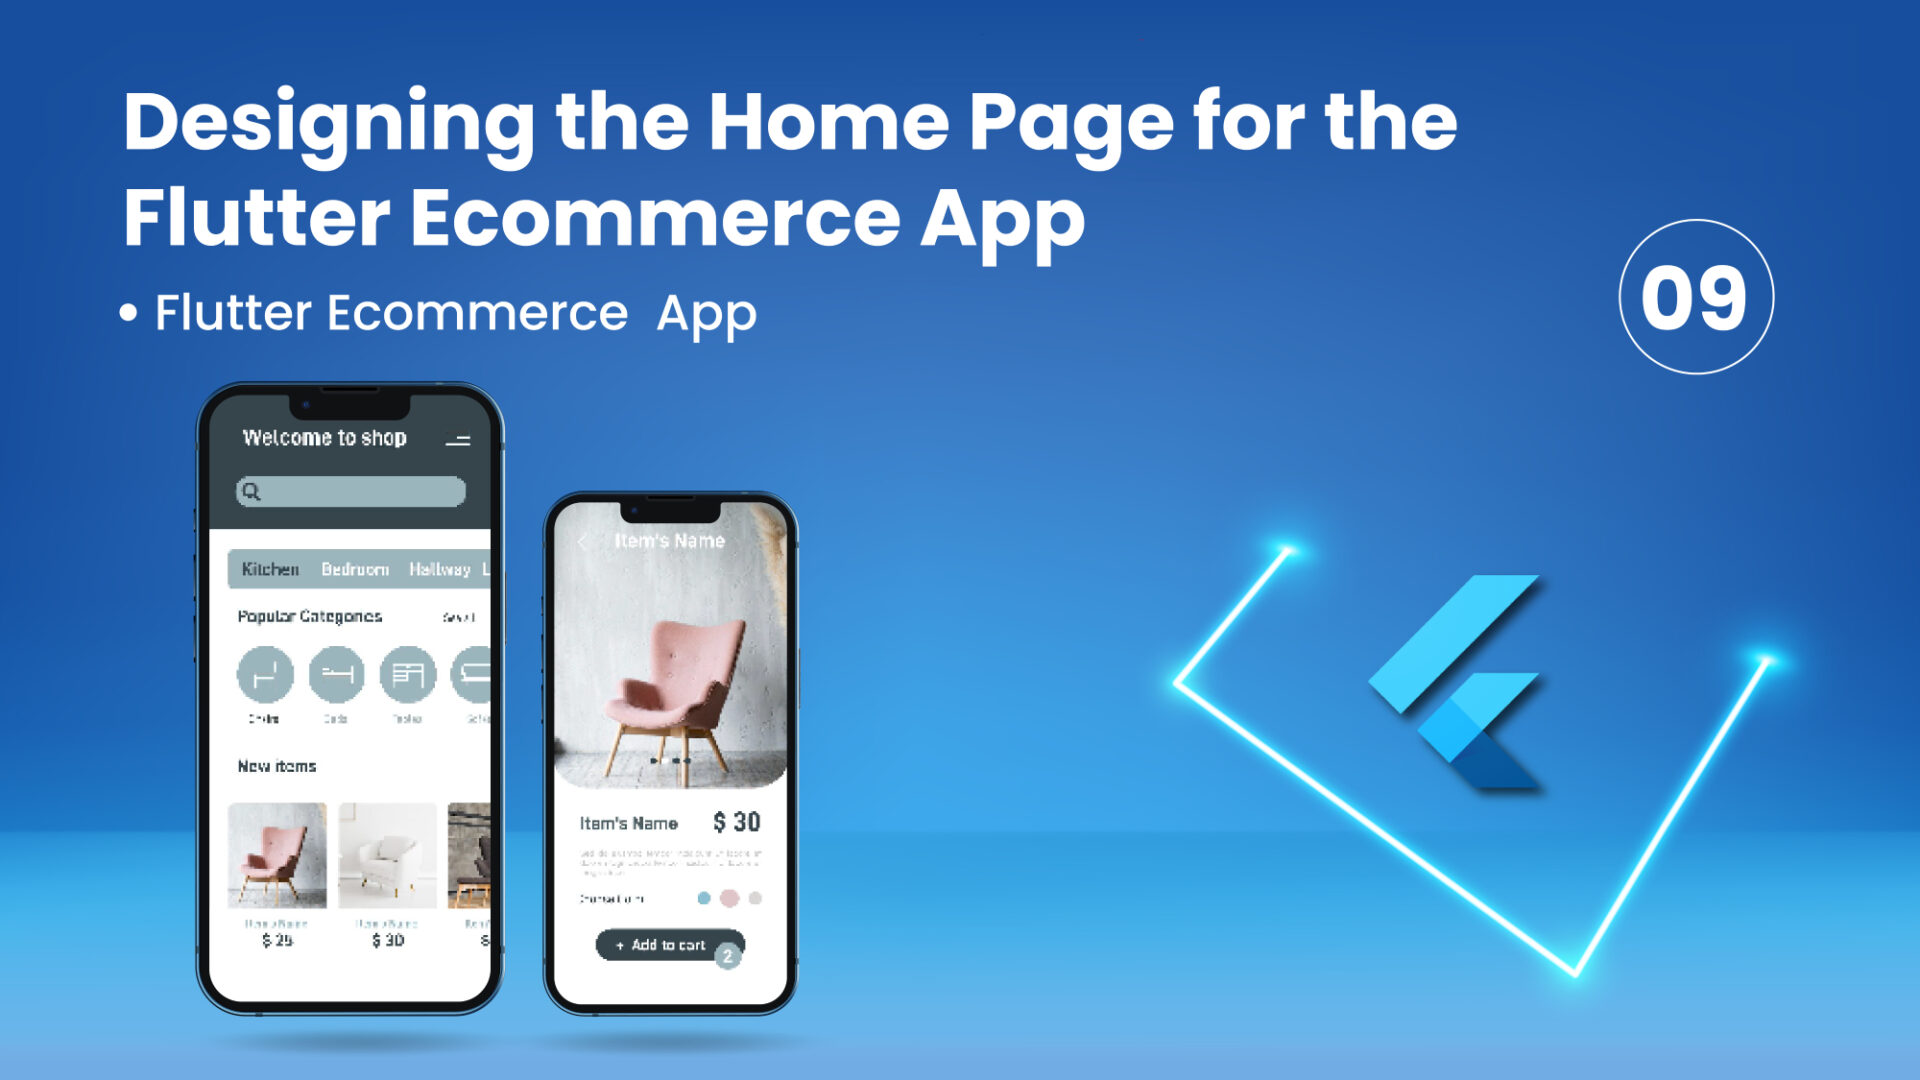 Designing the Home Page for the Flutter Ecommerce App